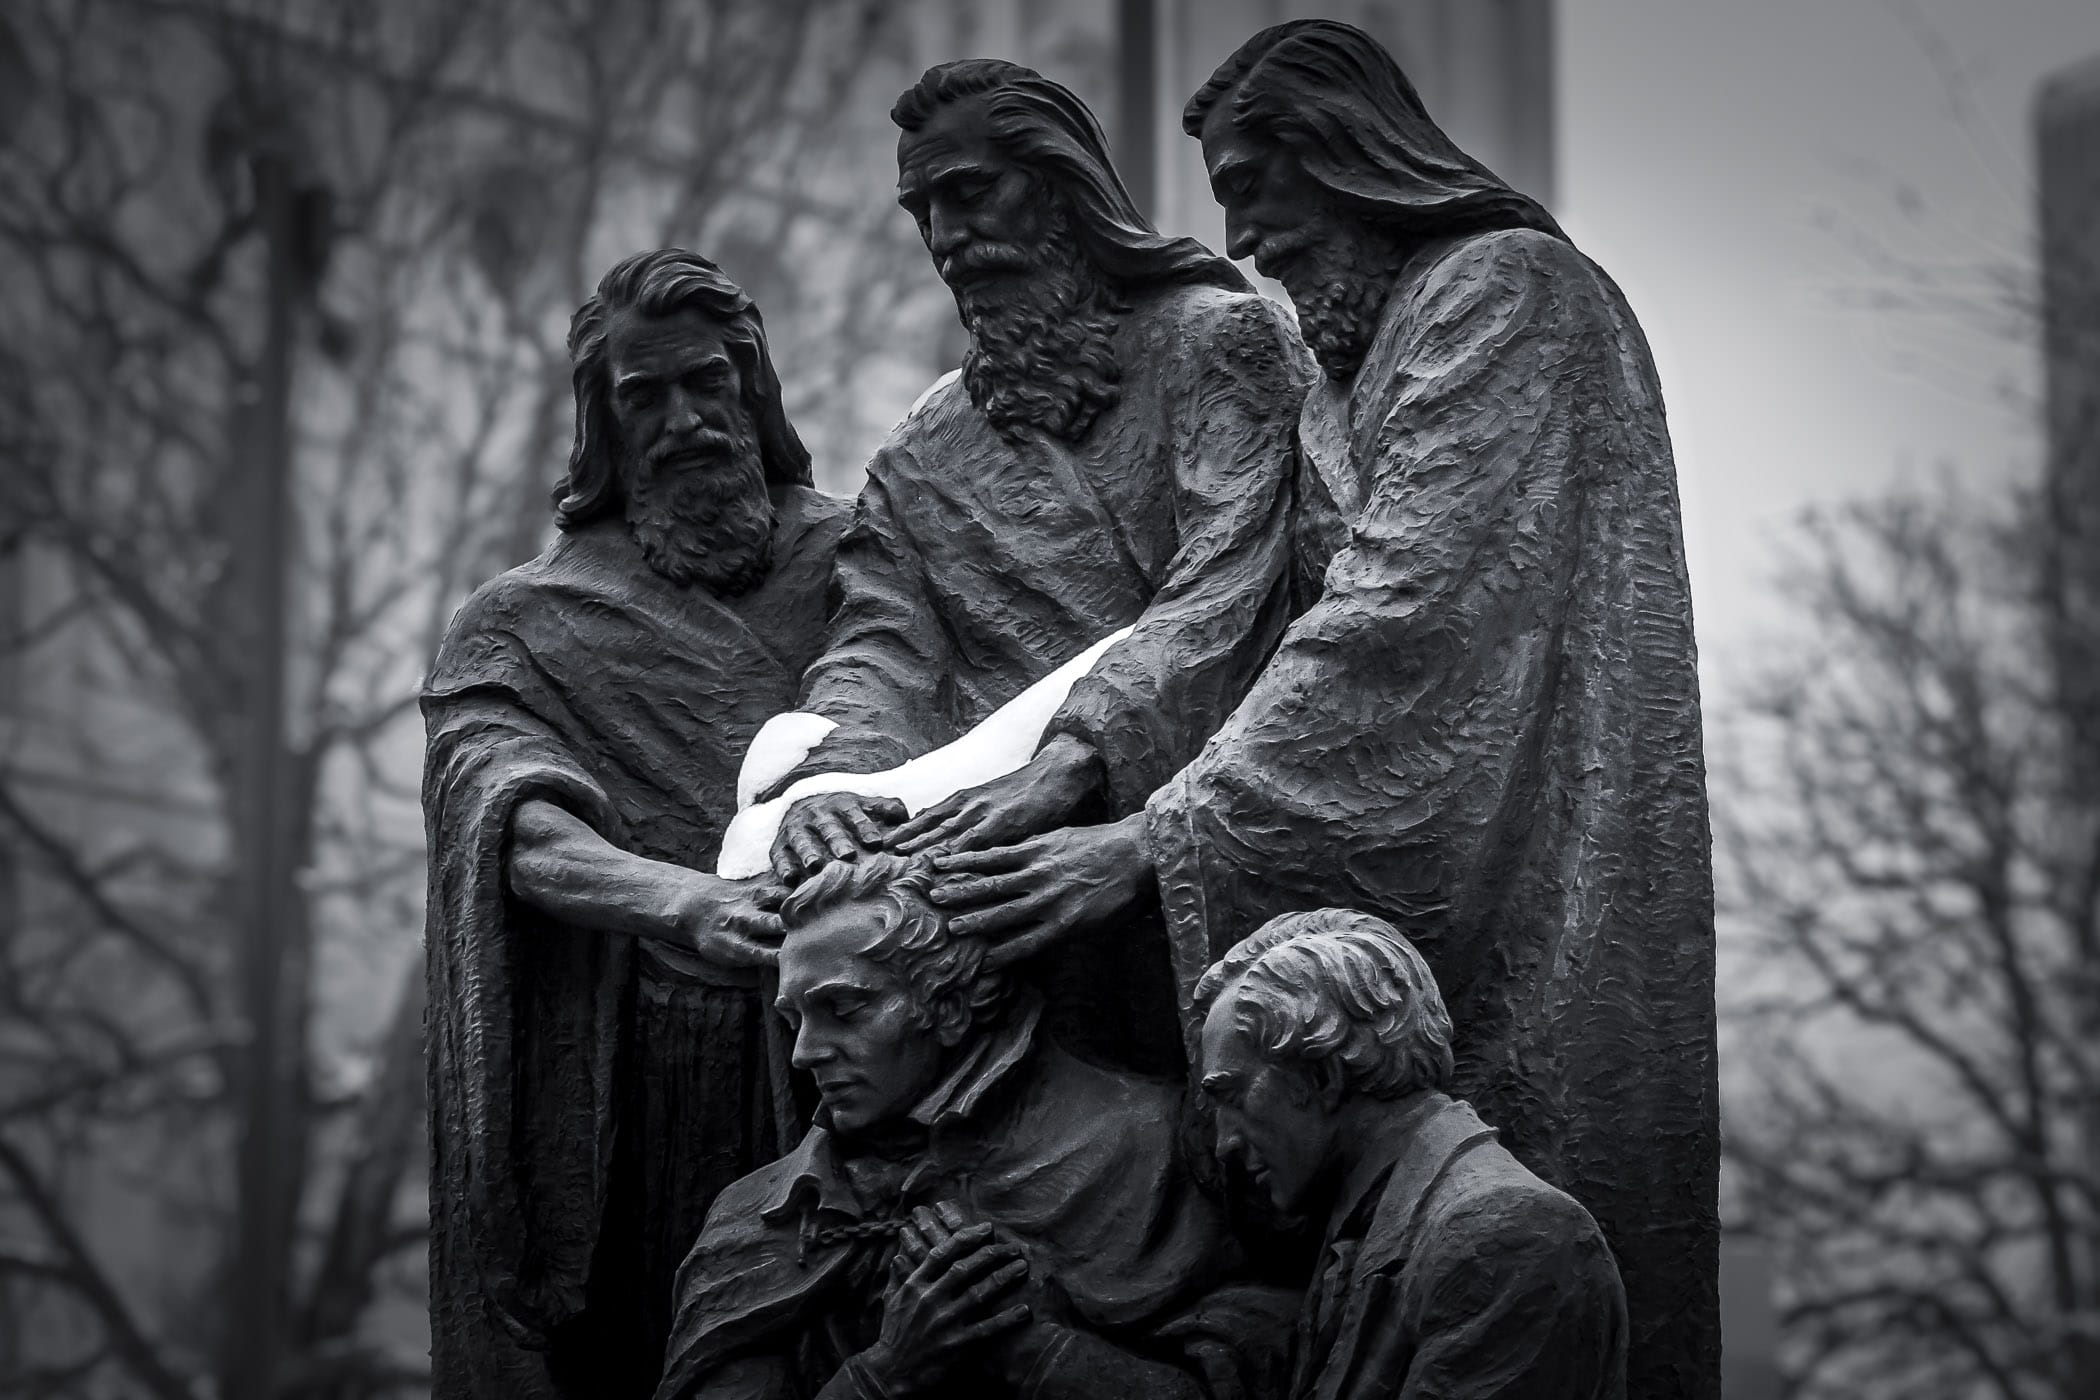 A bronze statue in Salt Lake City, Utah's Temple Square depicting Peter, James and John in the act of conferring the Melchizedek priesthood to Joseph Smith and Oliver Cowdery, founders of the Latter Day Saints movement.